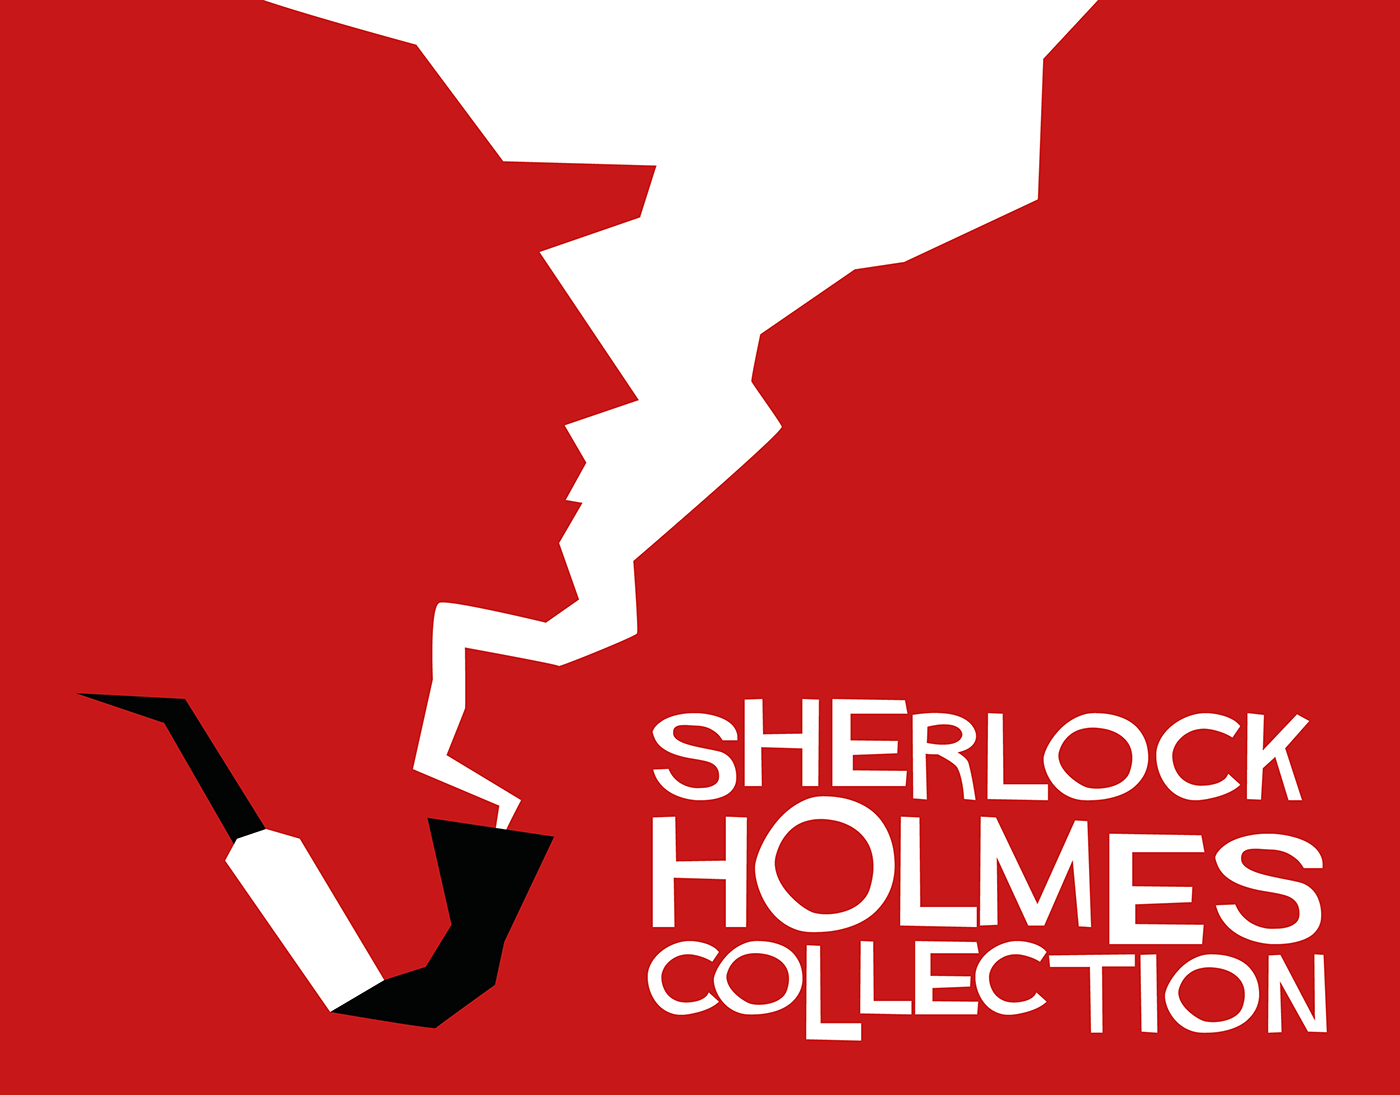 scherlock holmes book Cover Book adobe photoshop Illustrator color graphic Collection mock up